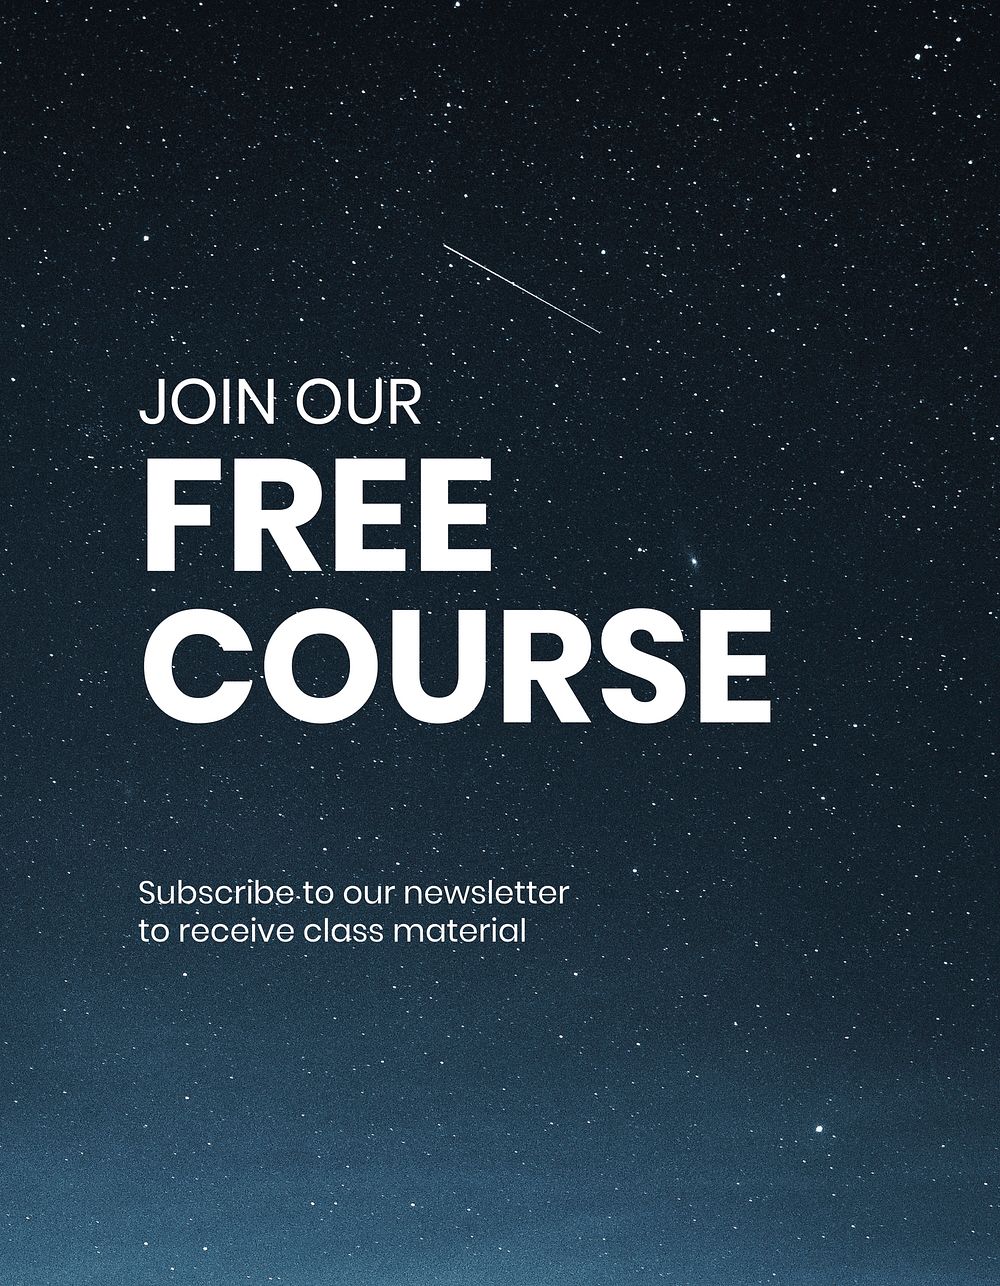 Free course flyer template, editable text psd